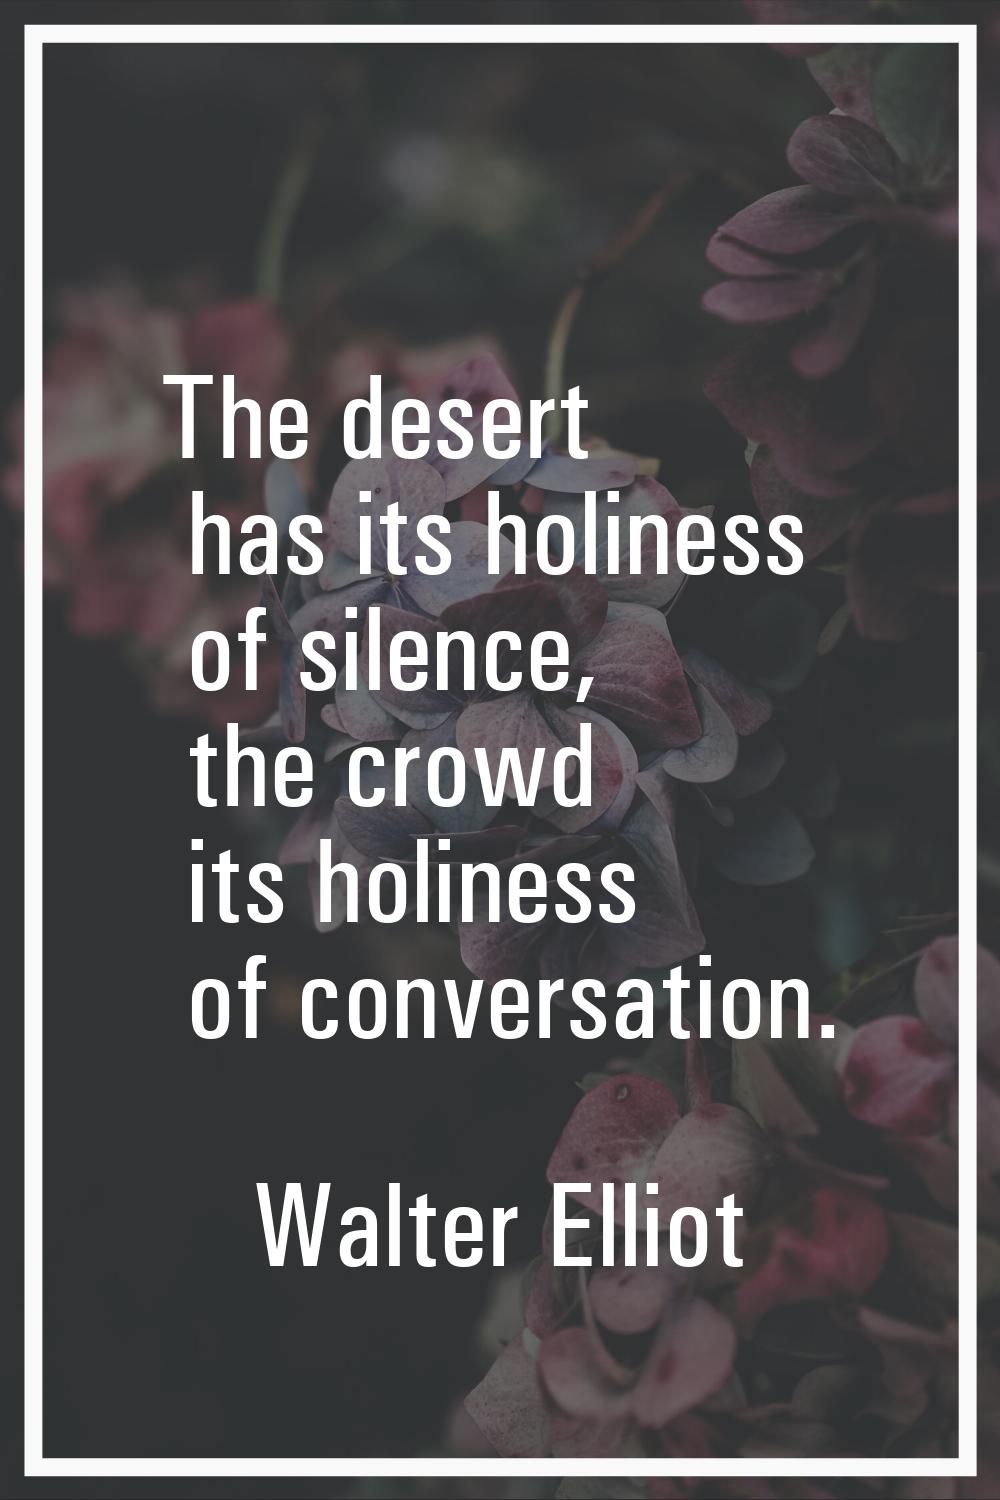 The desert has its holiness of silence, the crowd its holiness of conversation.